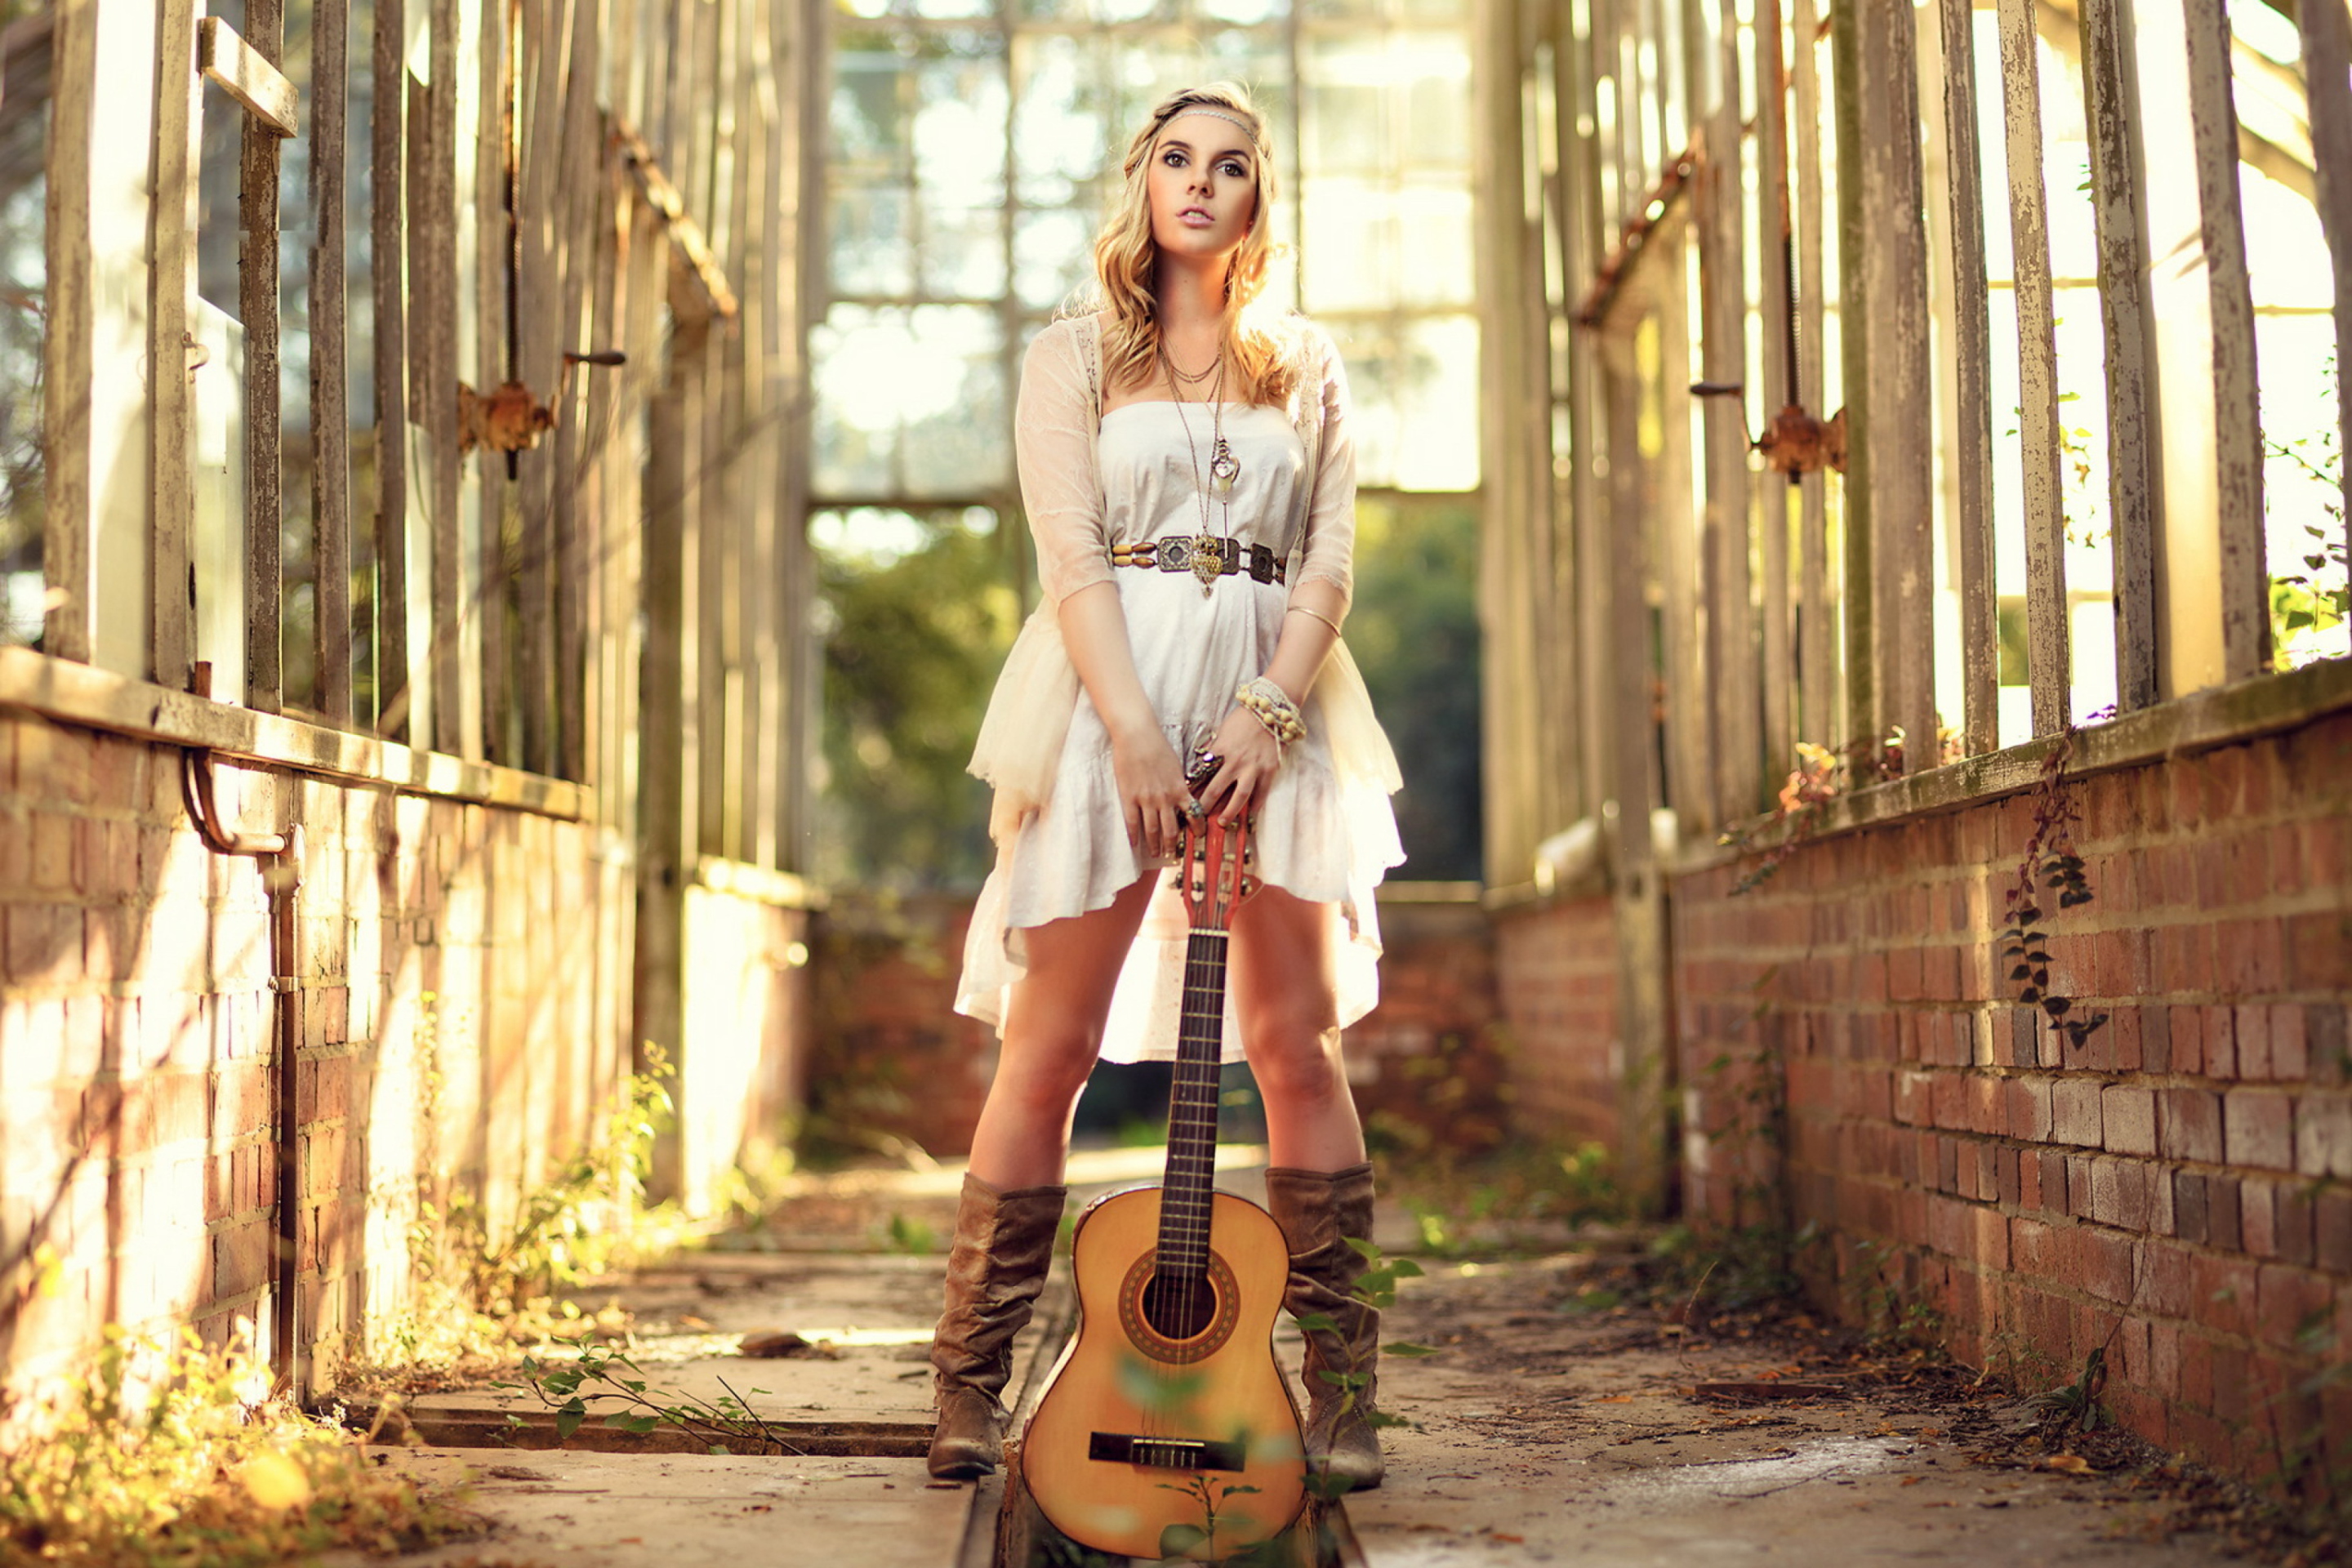 Sfondi Girl With Guitar Chic Country Style 2880x1920